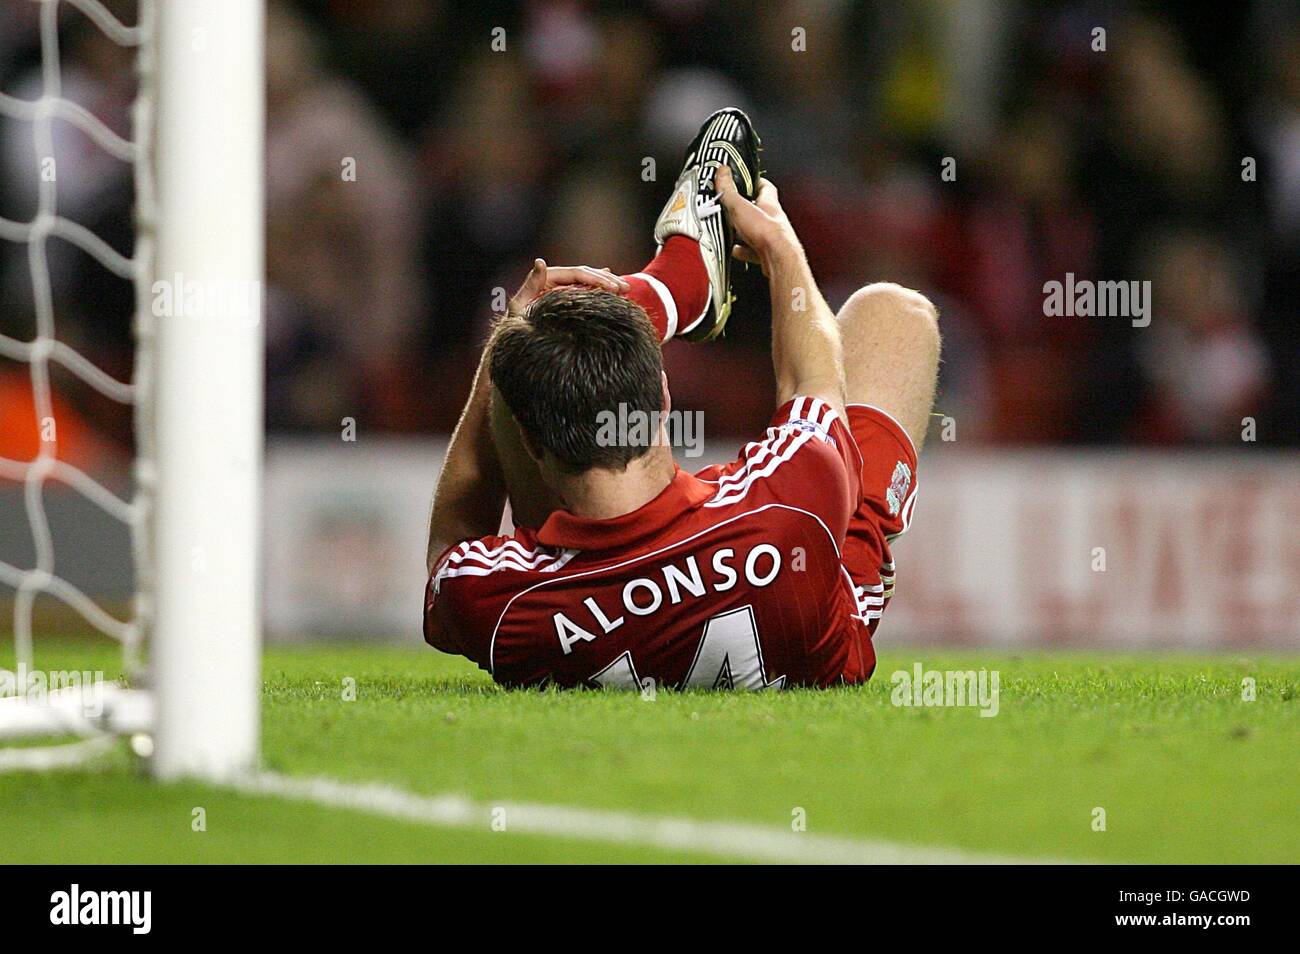 Liverpool 's Xabi Alonso lays injured on the ground clutching his foot  Stock Photo - Alamy